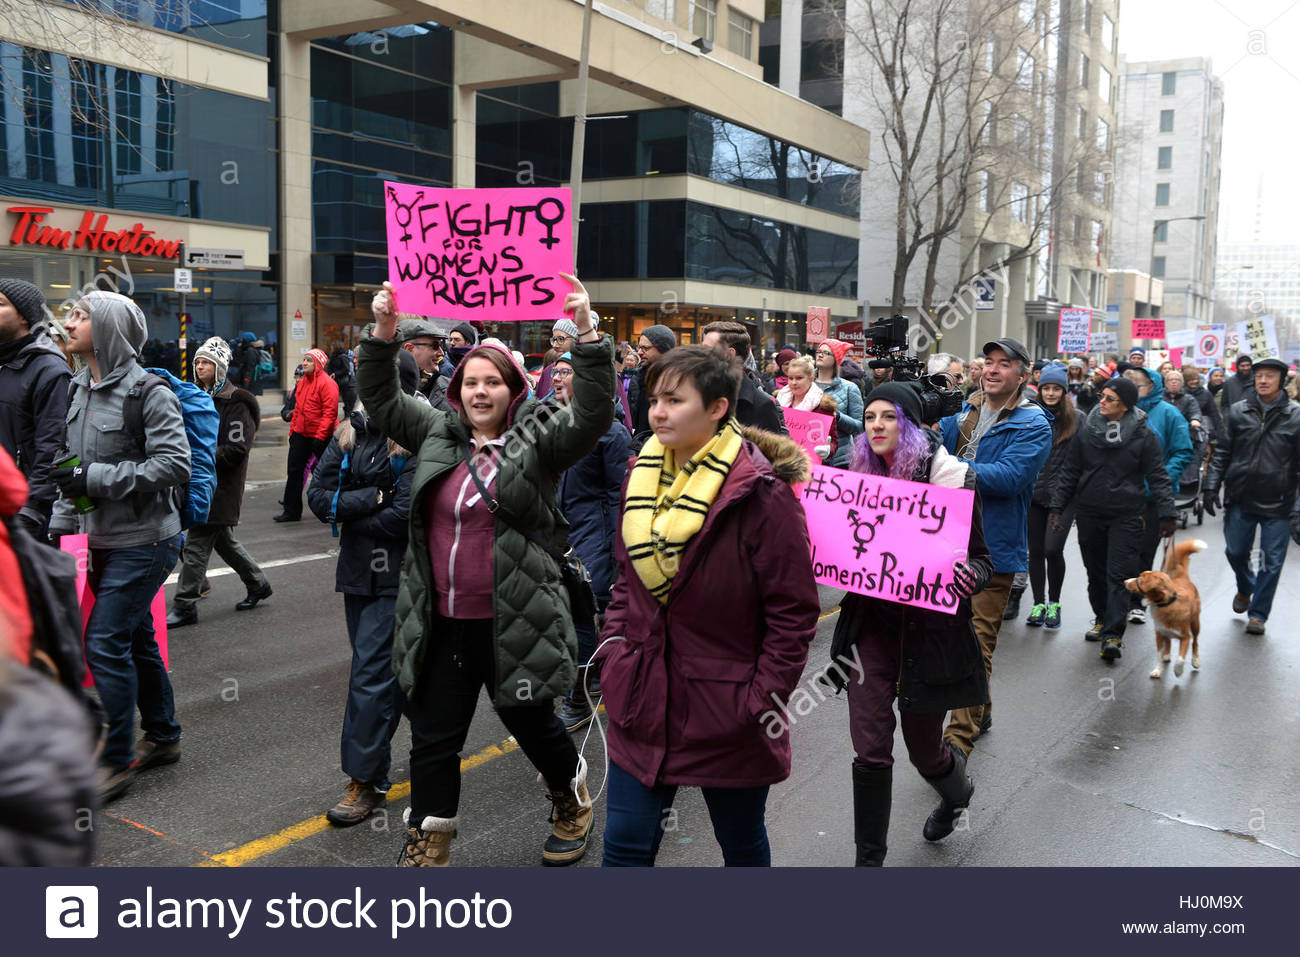 Women marching with signs